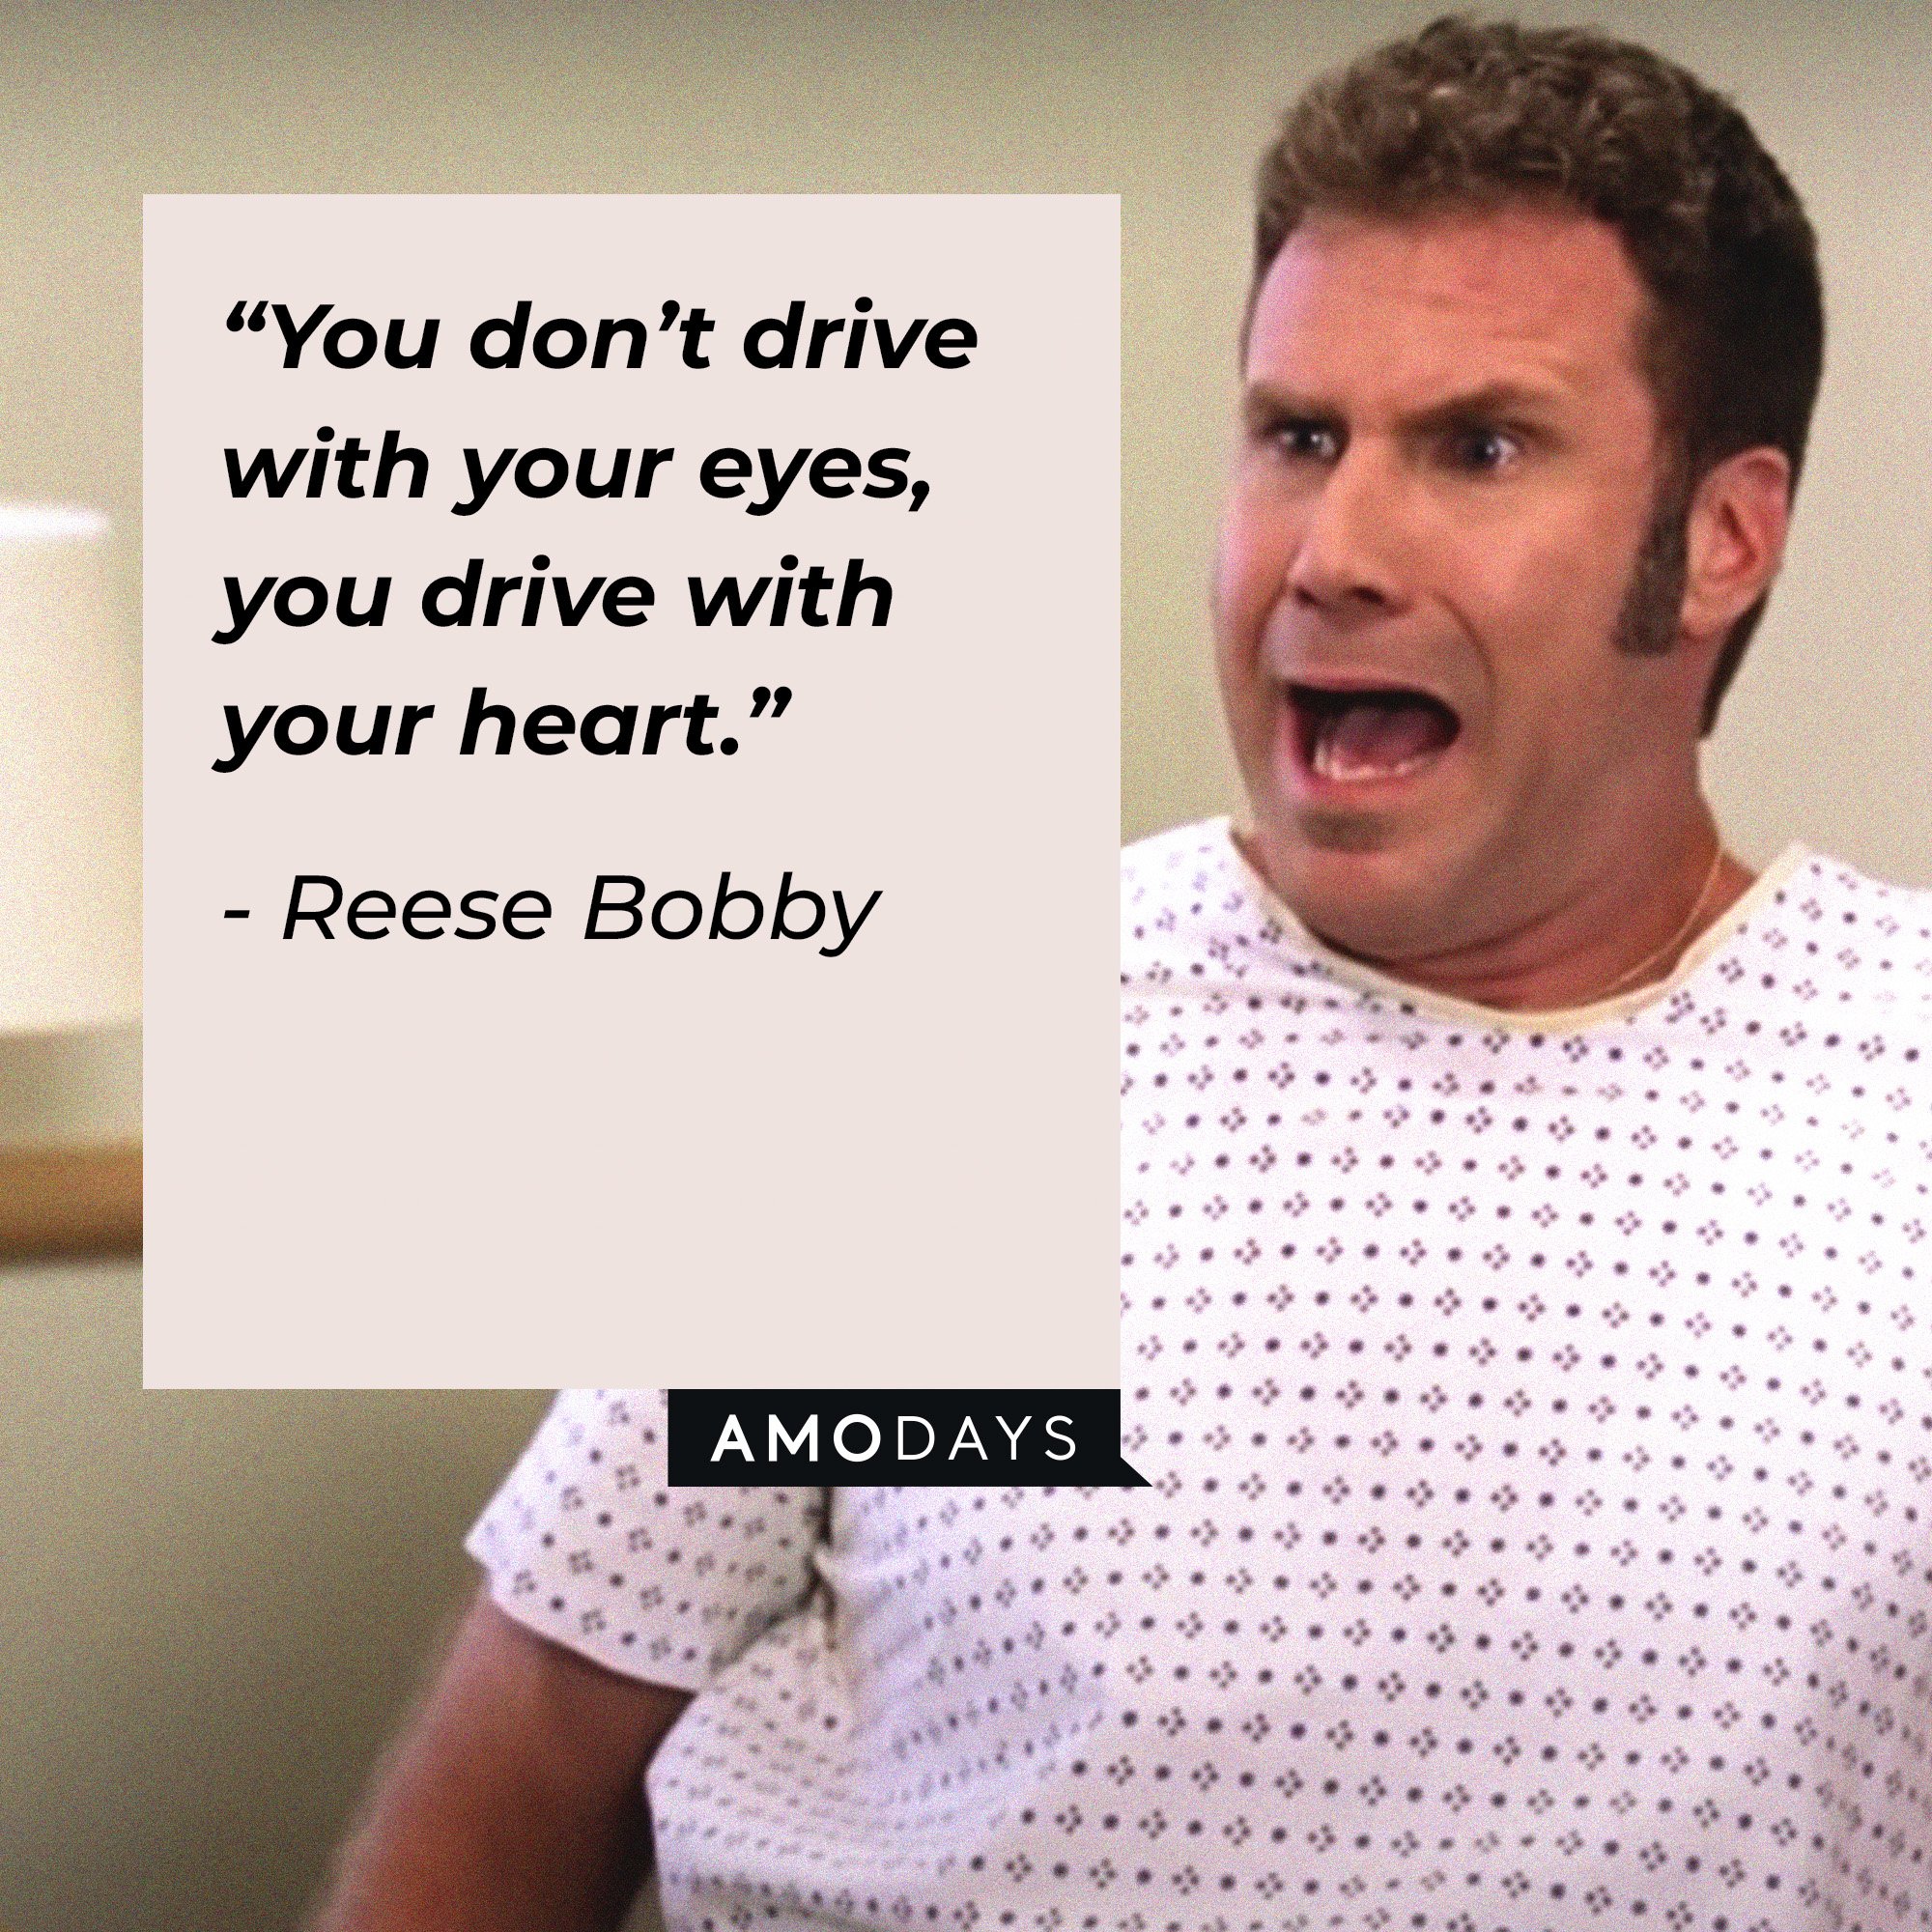 Reese Bobby’s quote: “You don’t drive with your eyes; you drive with your heart.” | Image: AmoDays